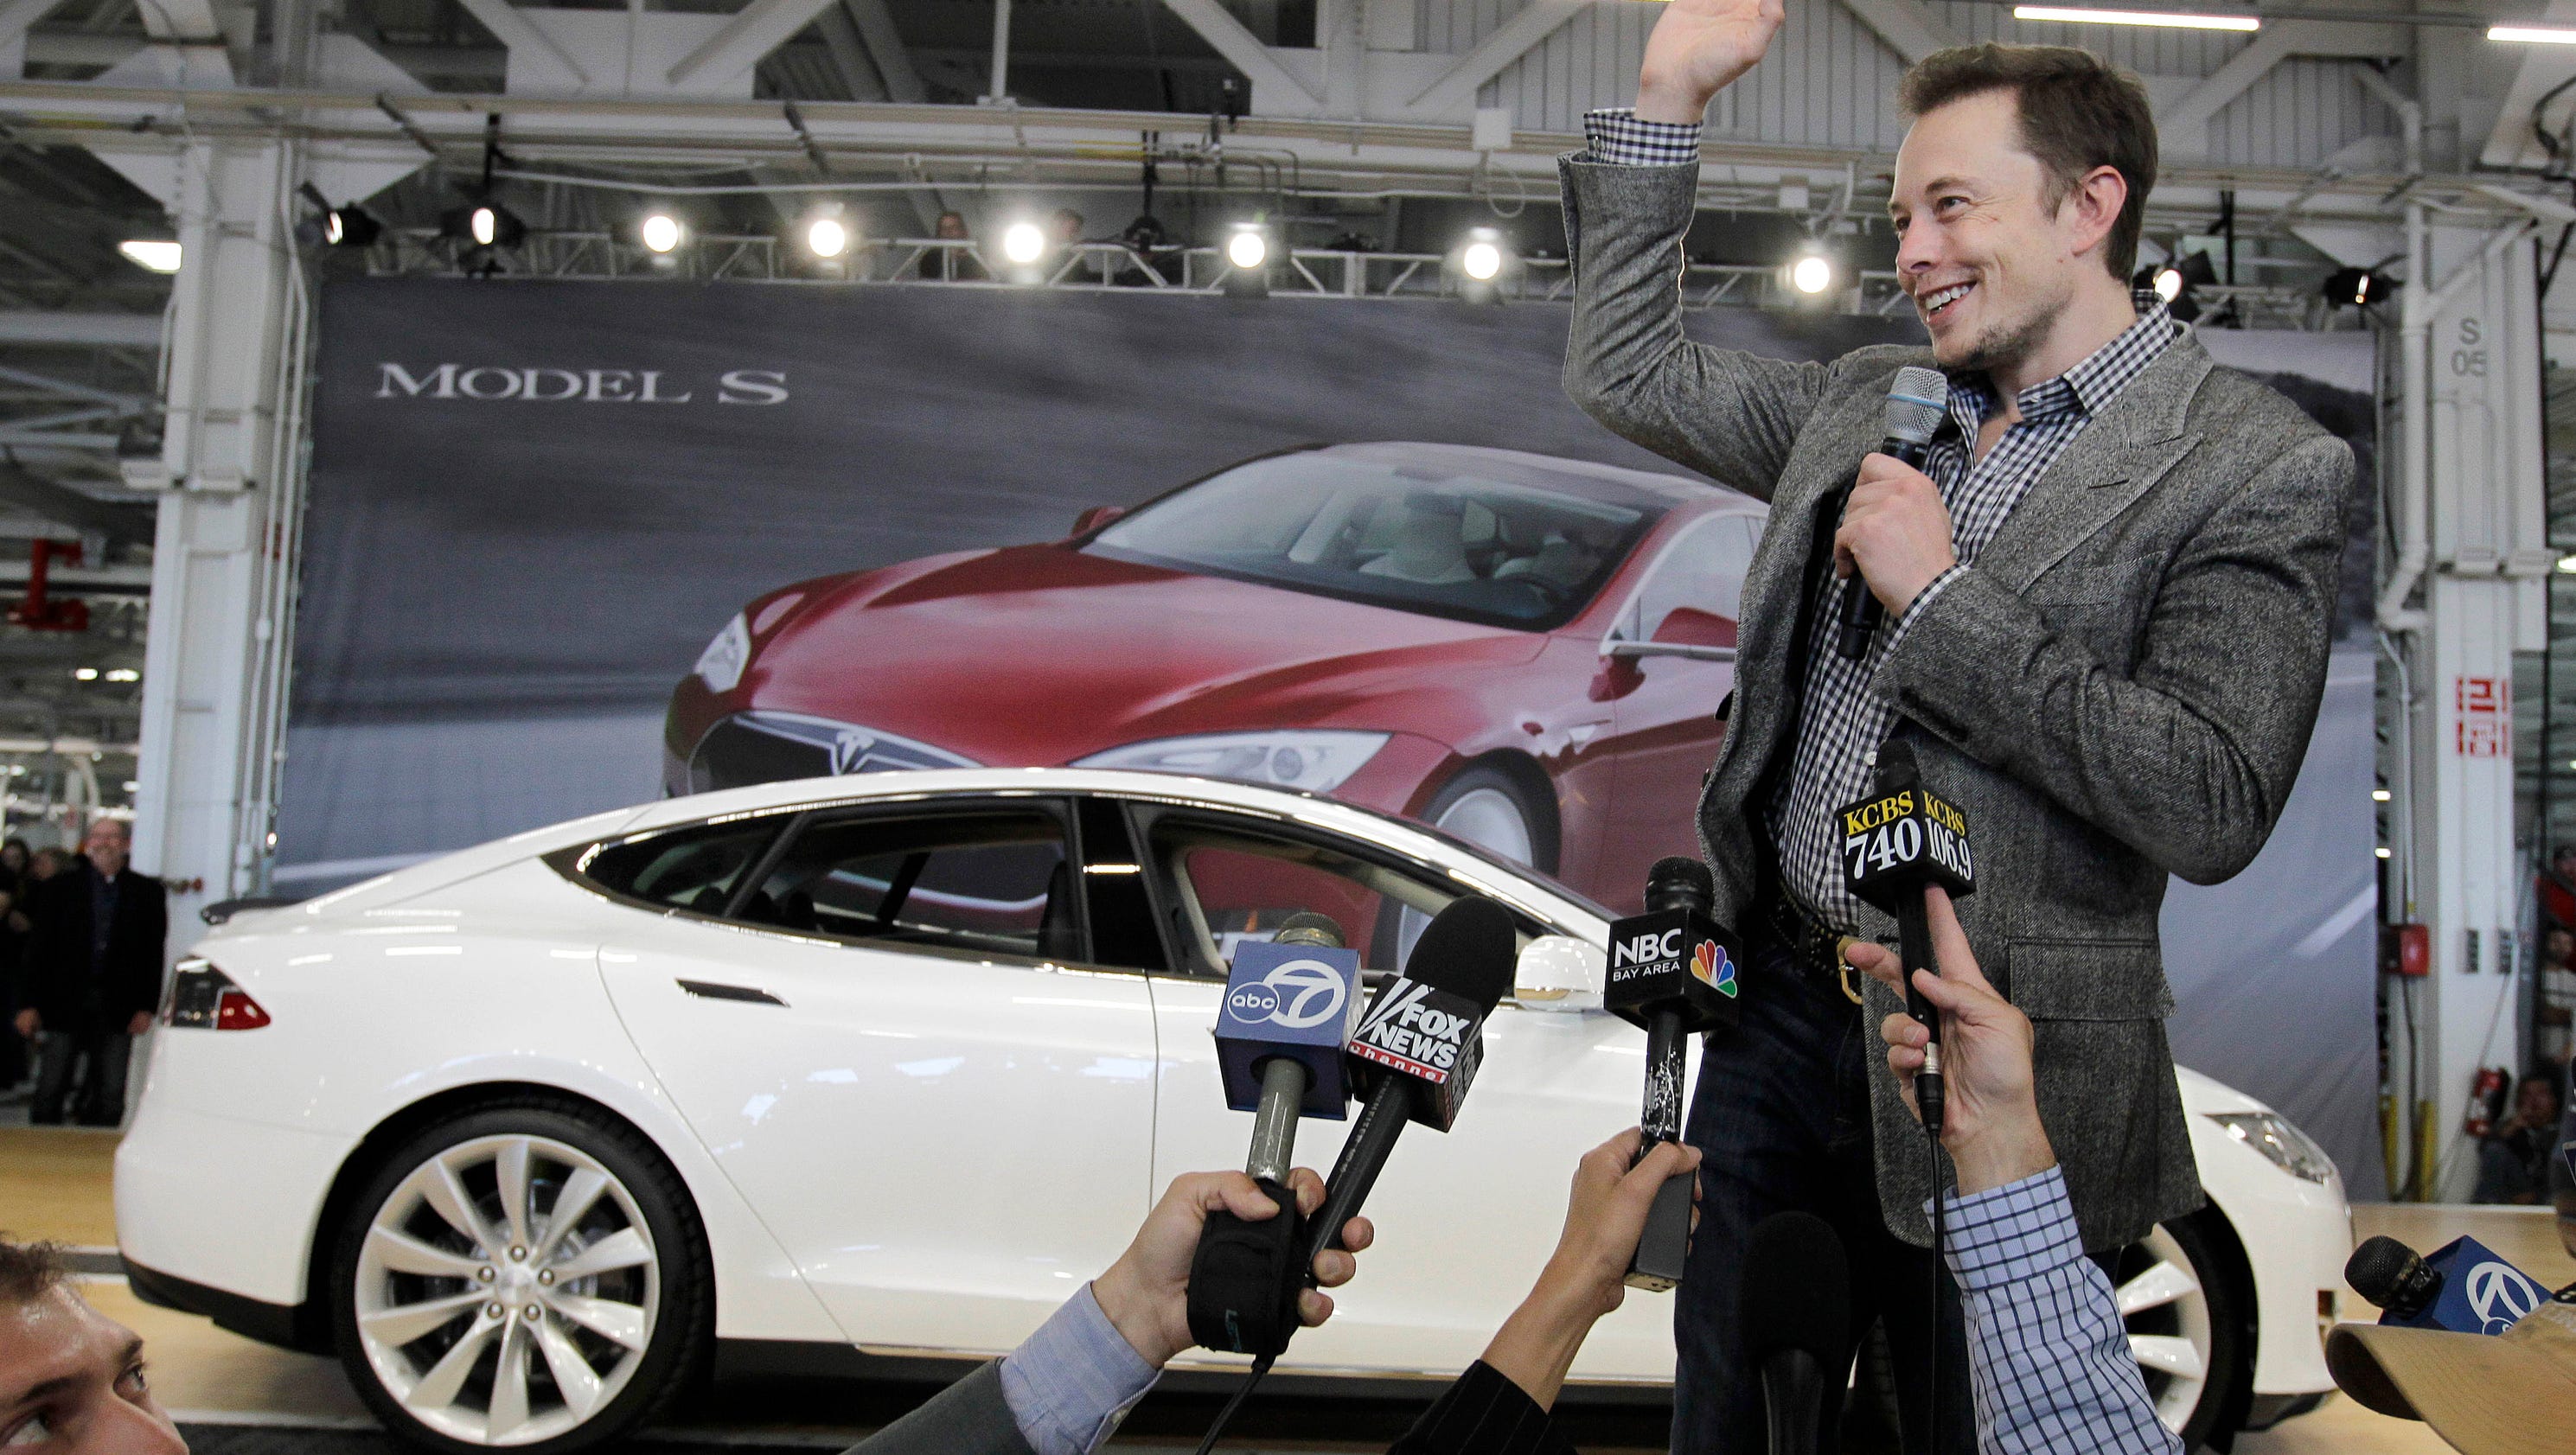 Tesla CEO Elon Musk: Cars all go self-driving in 20 years3200 x 1680